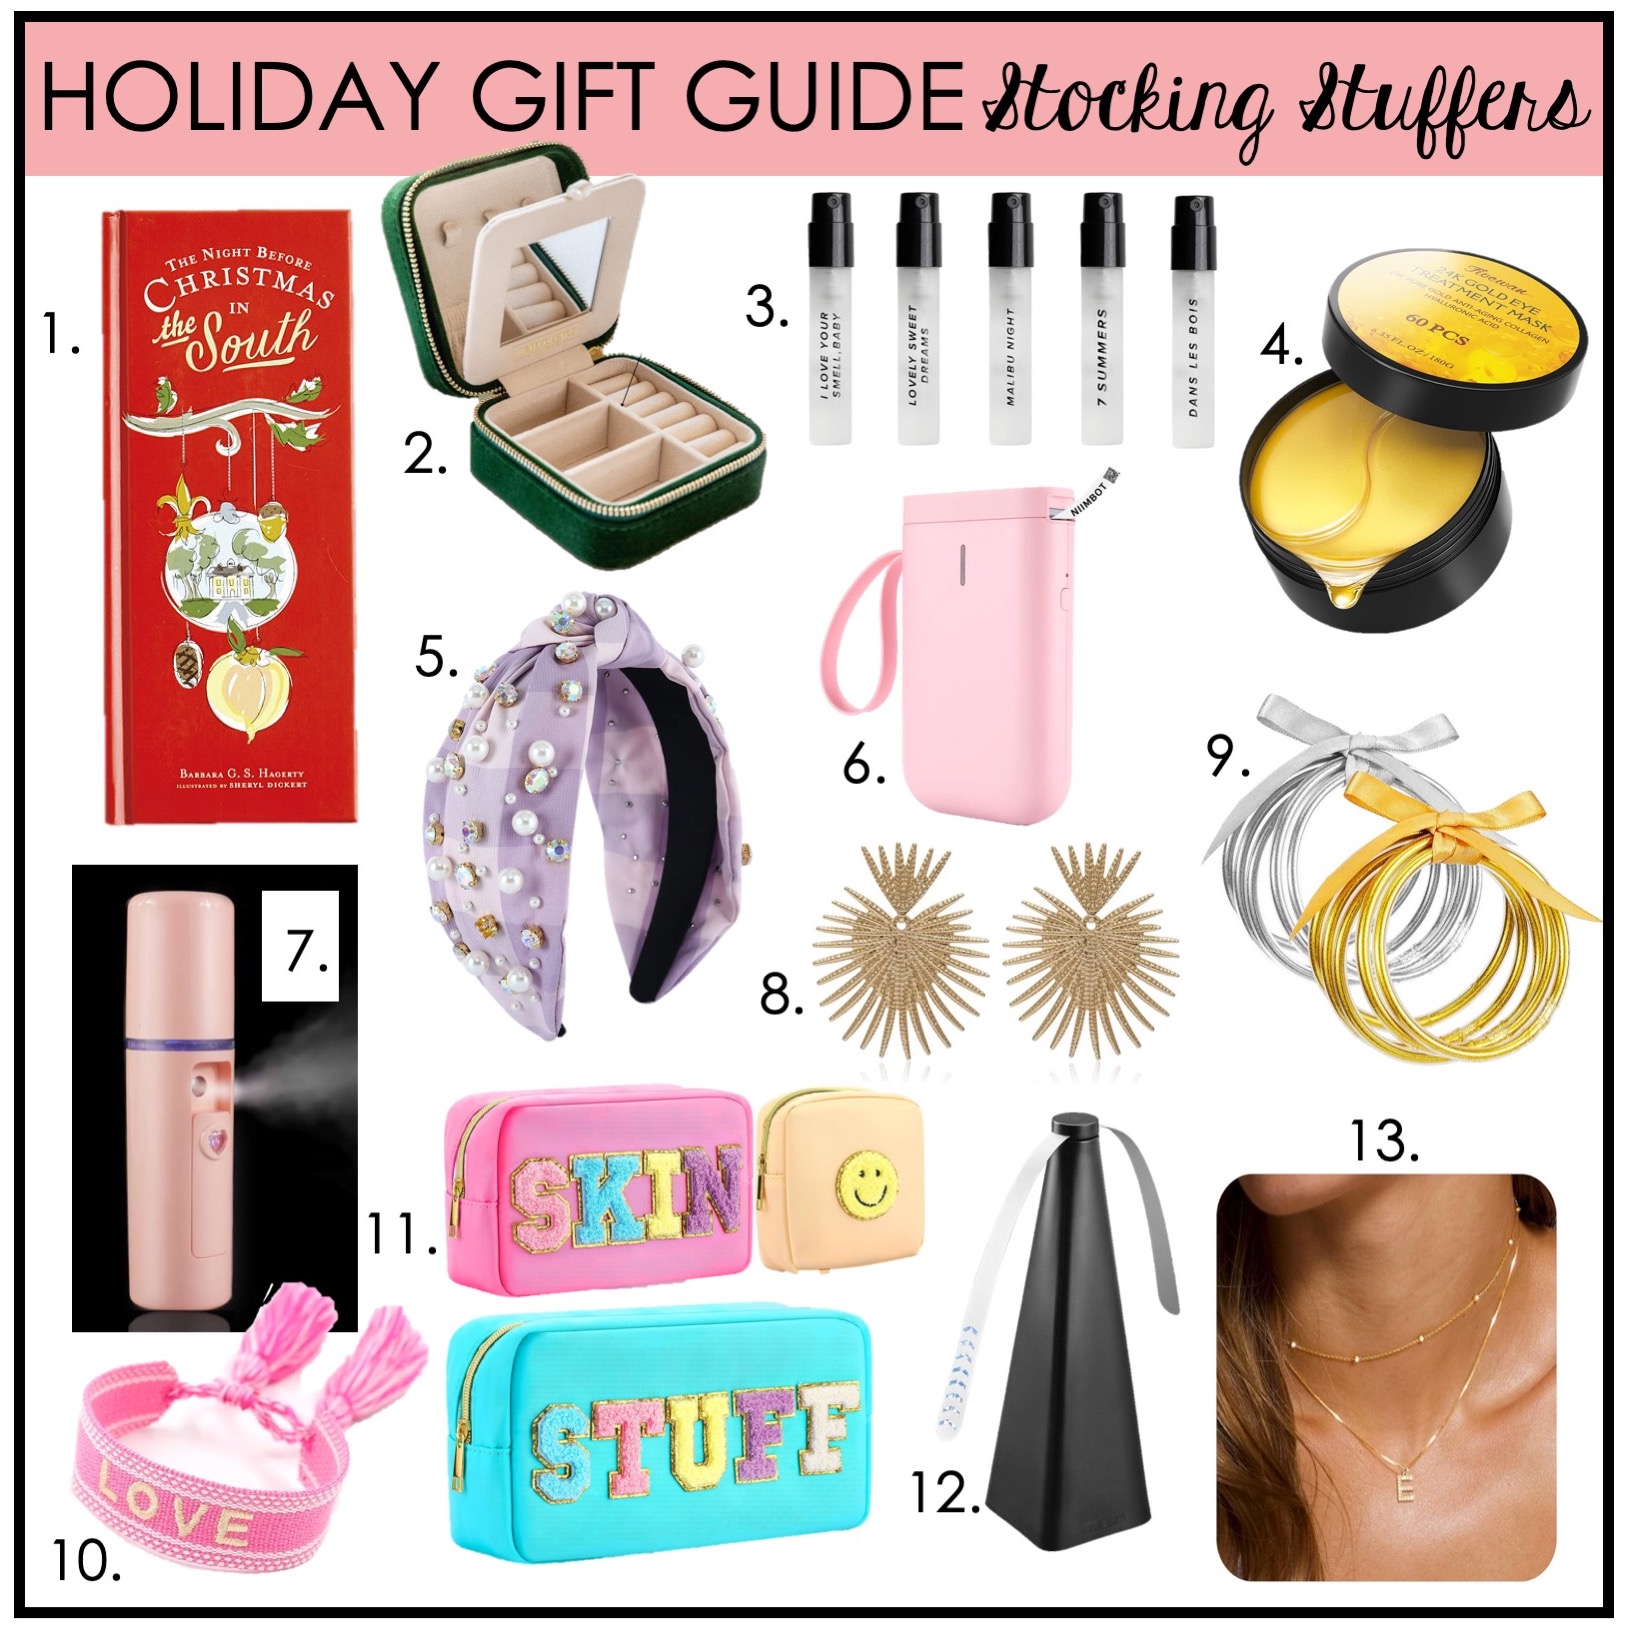 Holiday Gift Guide: Stocking Stuffers! Small Gifts That Make a Big Impact